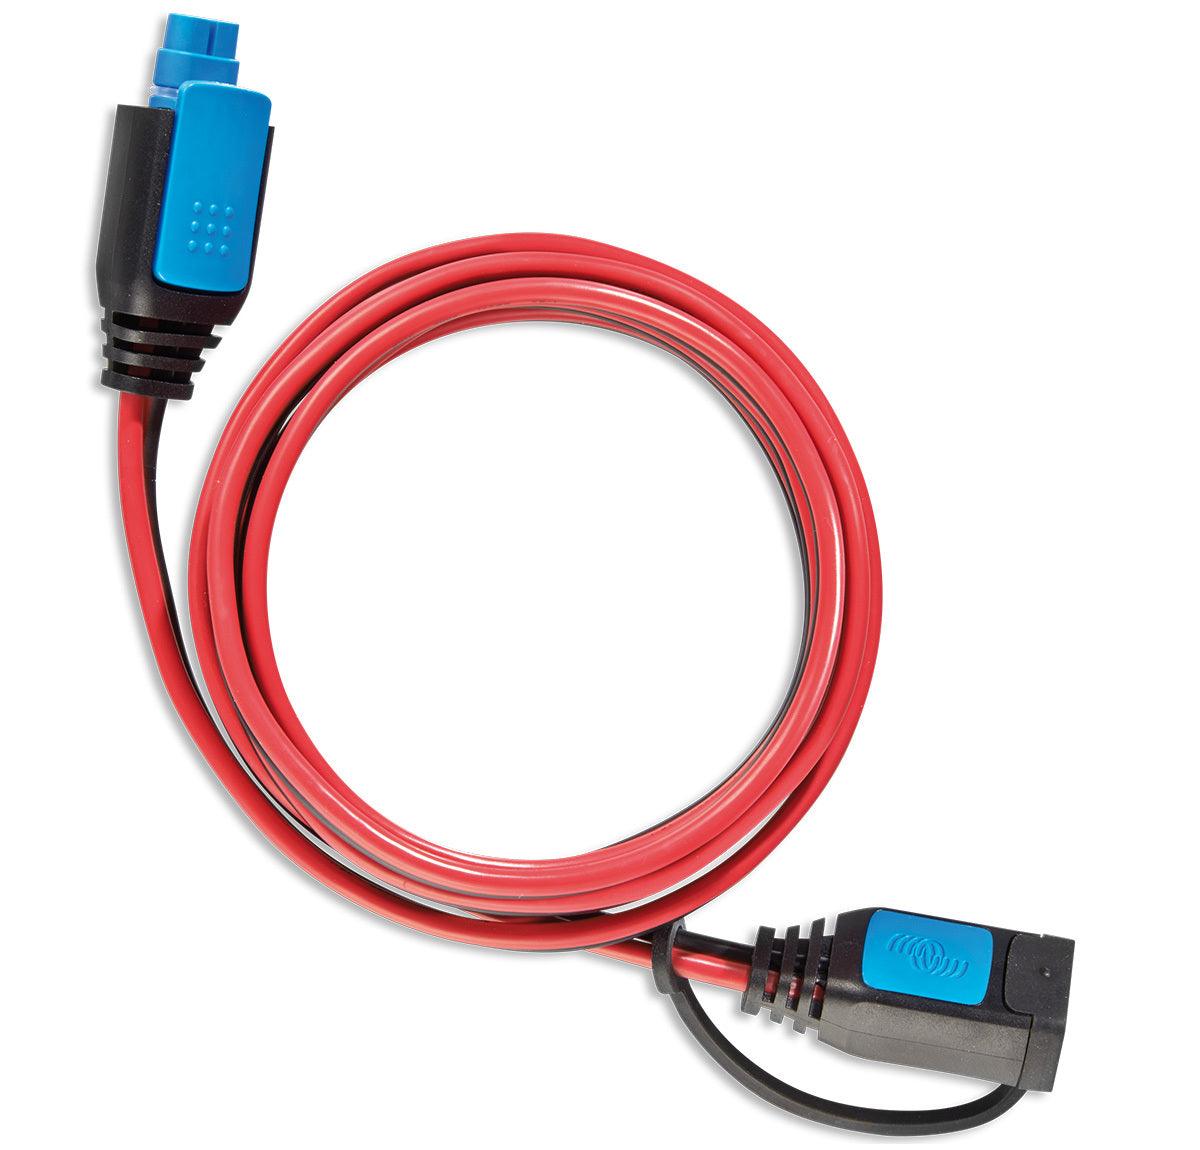 Victron 2 meter extension cable for Blue Smart IP65 Chargers - extremeoffgridaccessories